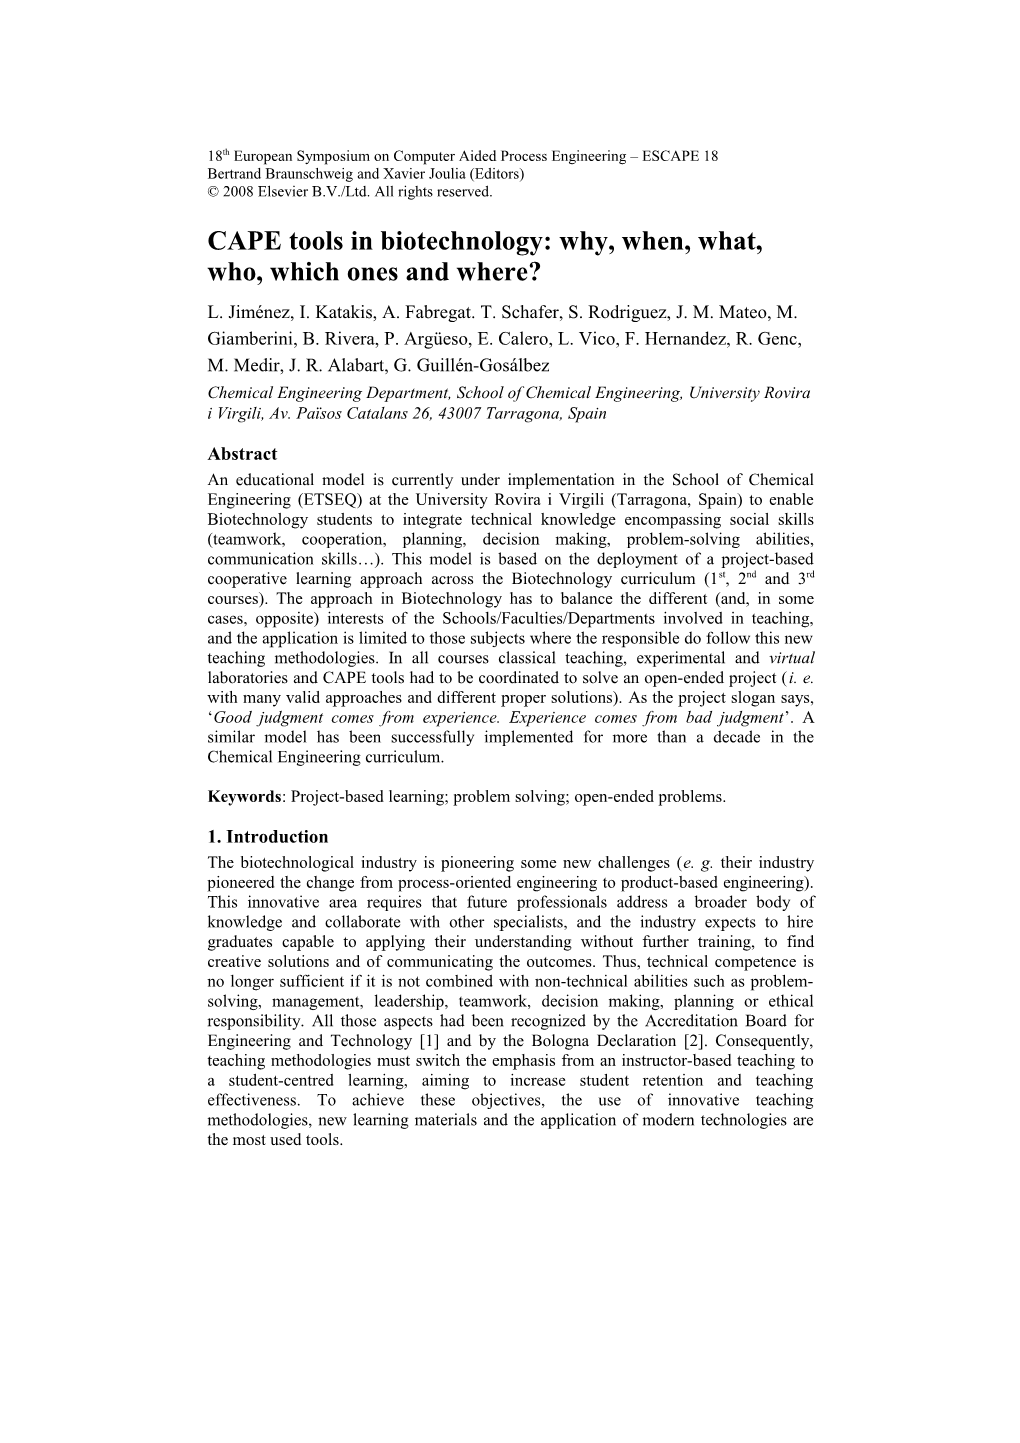 CAPE Tools in Biotechnology: Why, When, What, Who, Which Ones and Where?